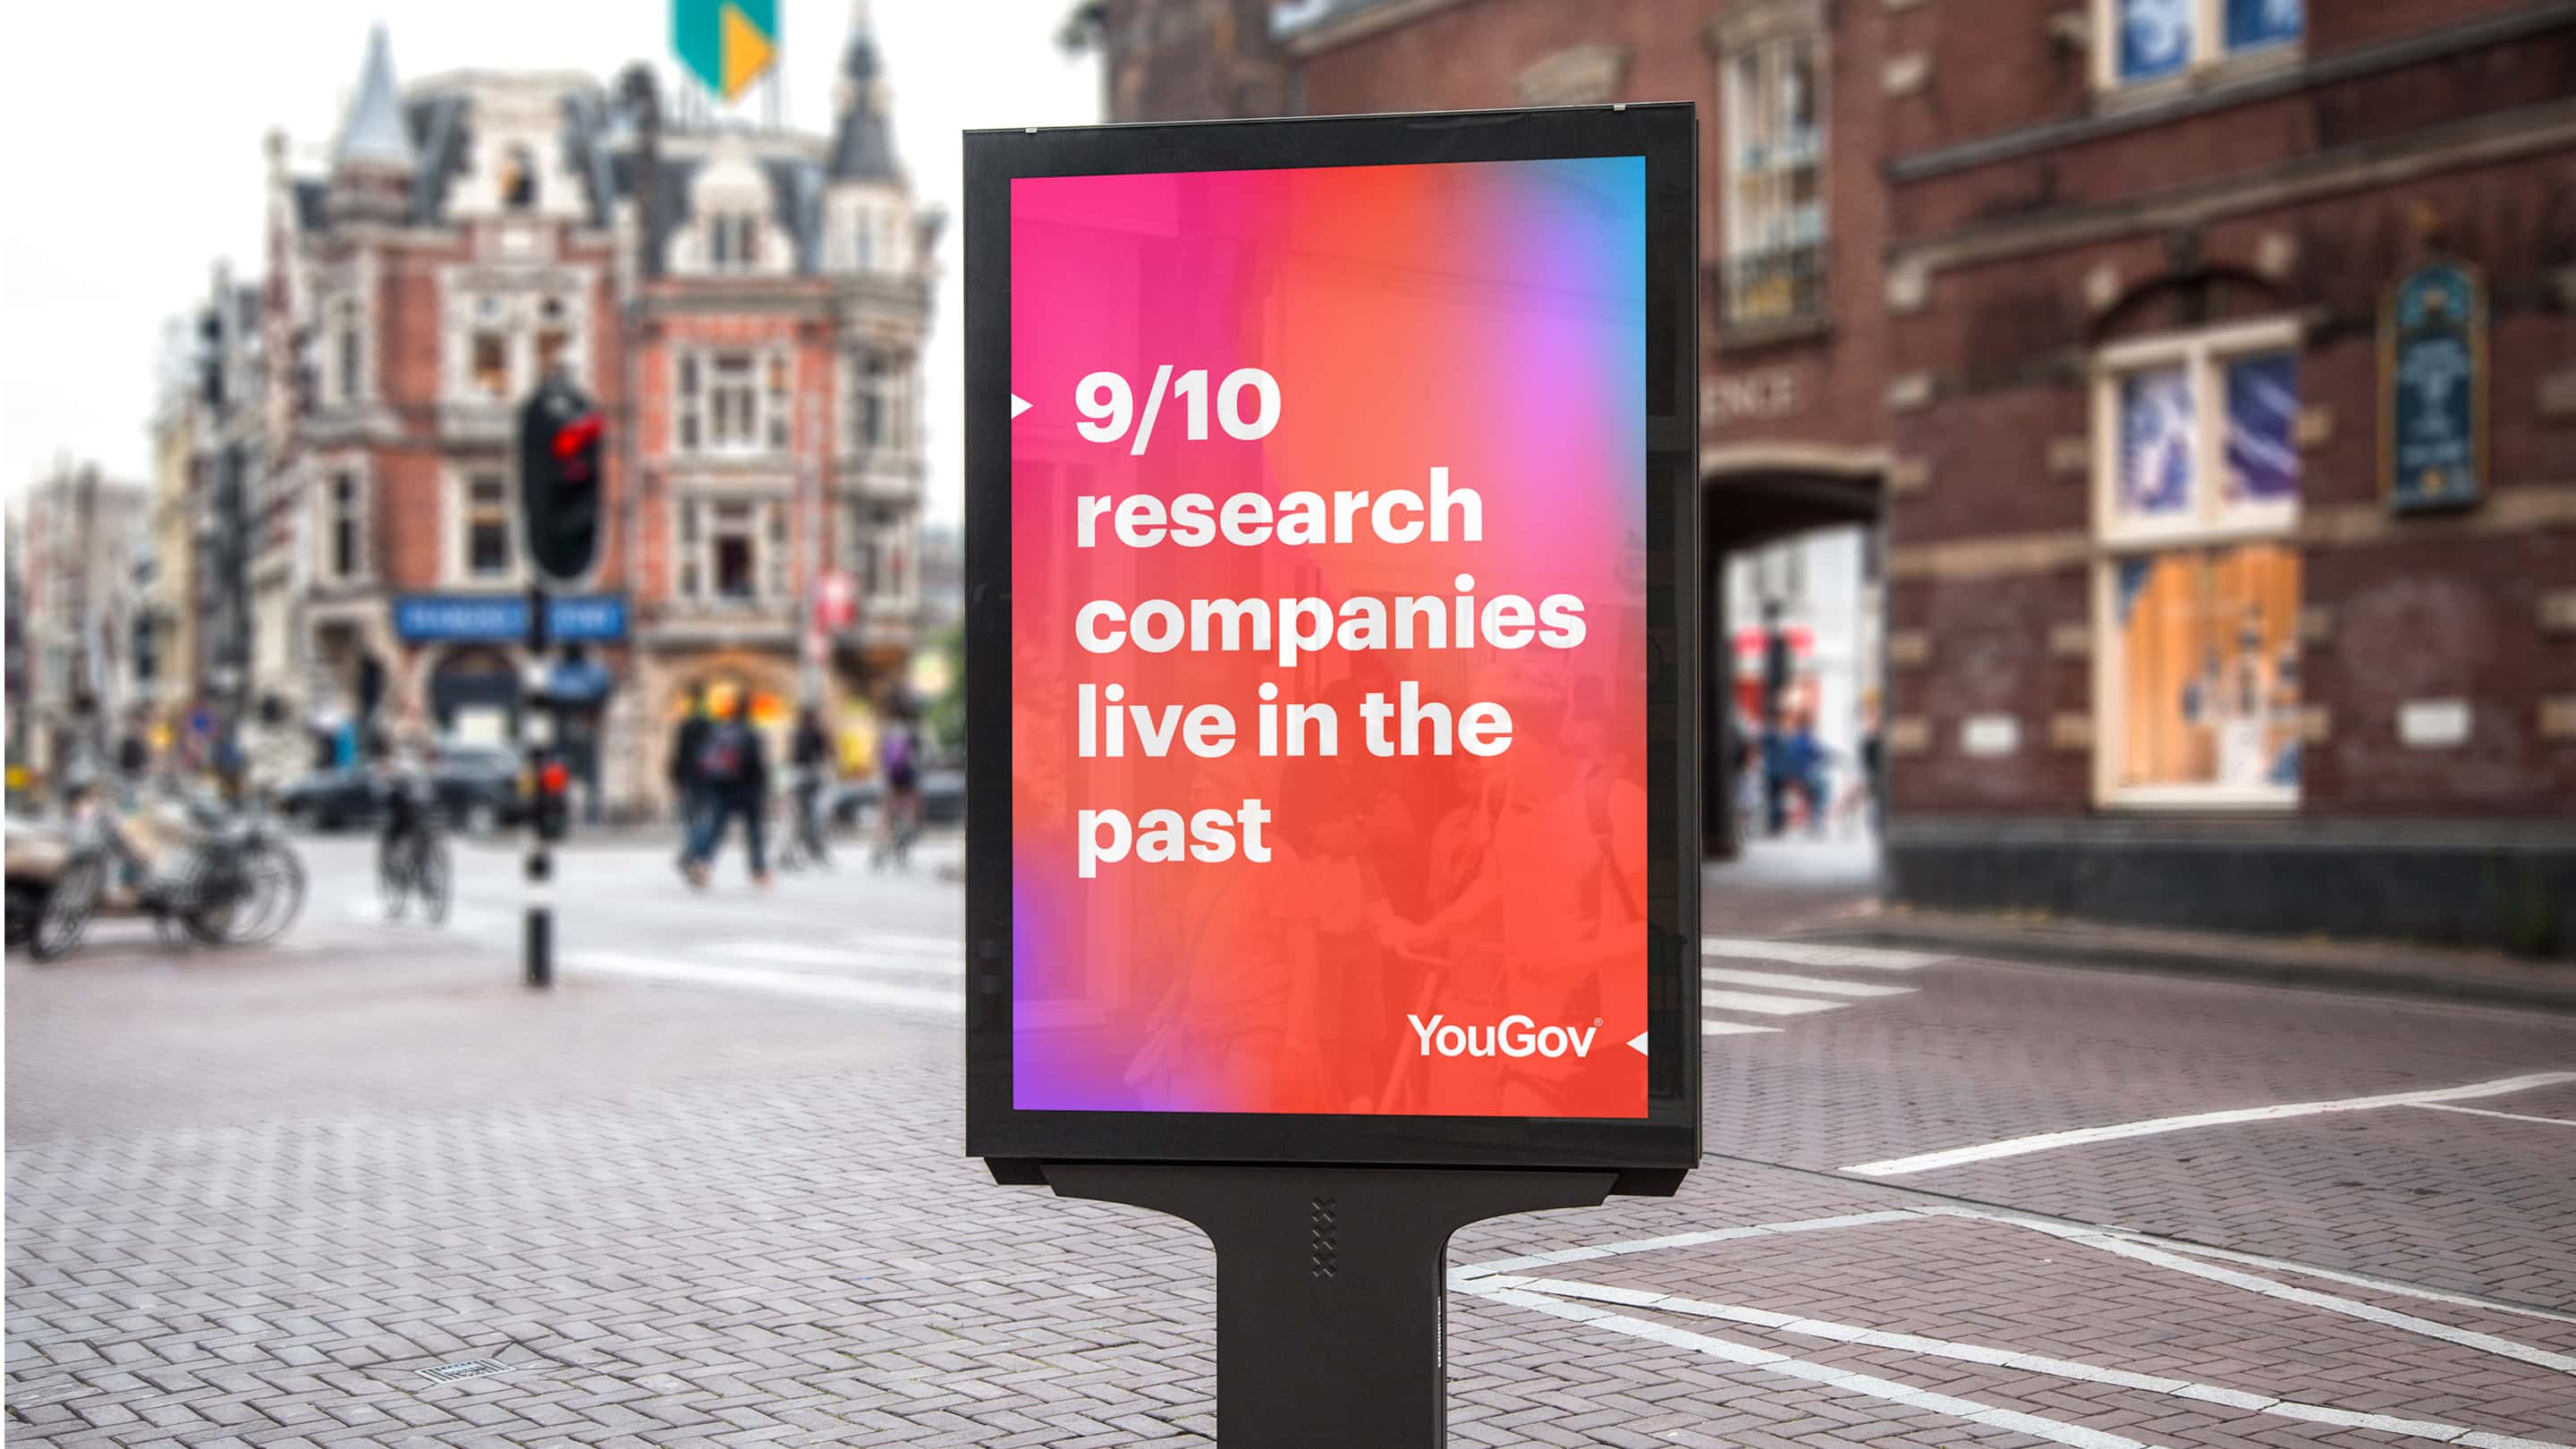 YouGov out of home advertising design